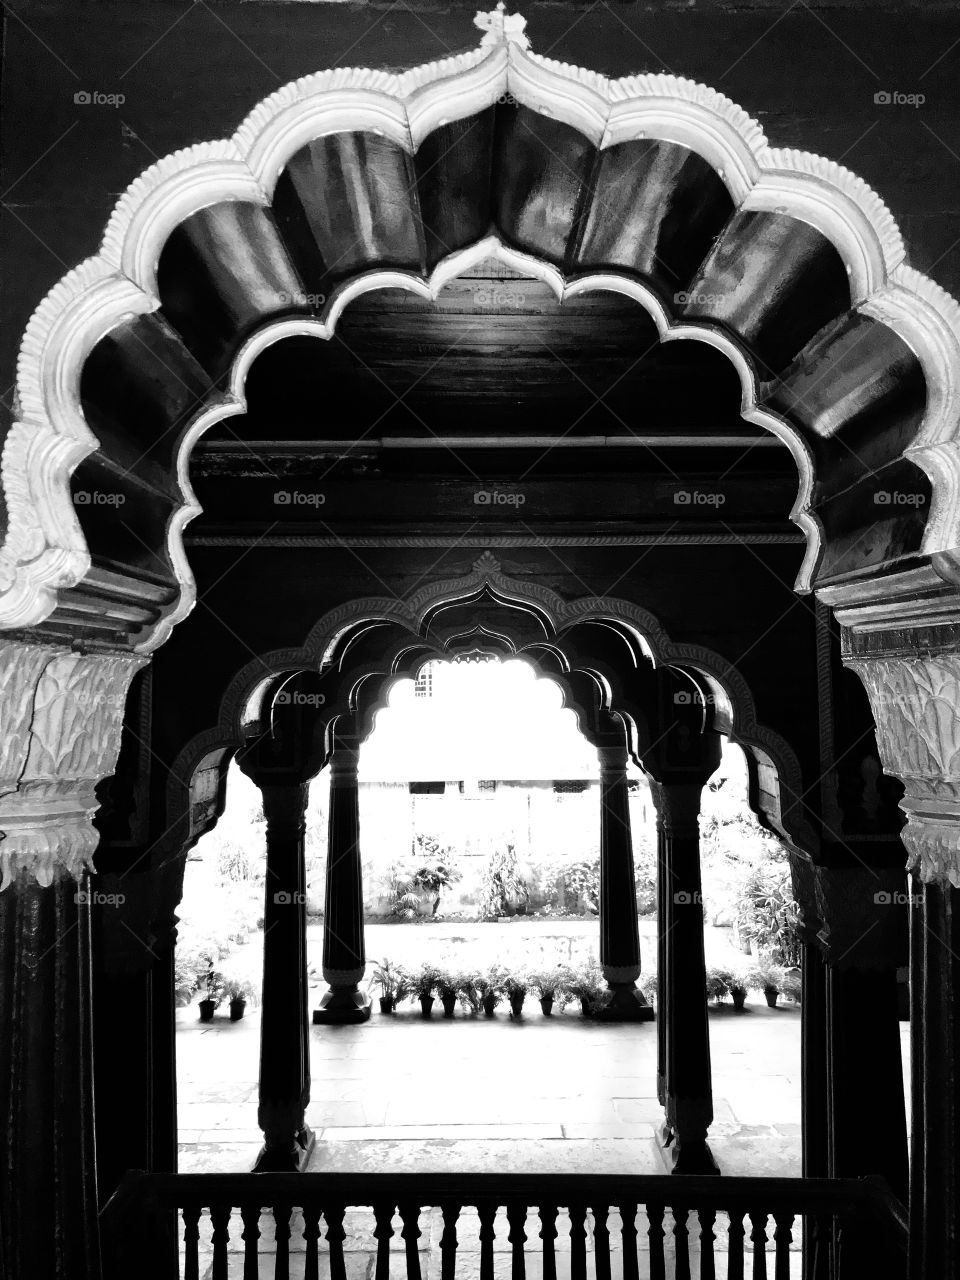 Ancient place in bangalore. Beautifully shot. Black and White. Perfect pattern.